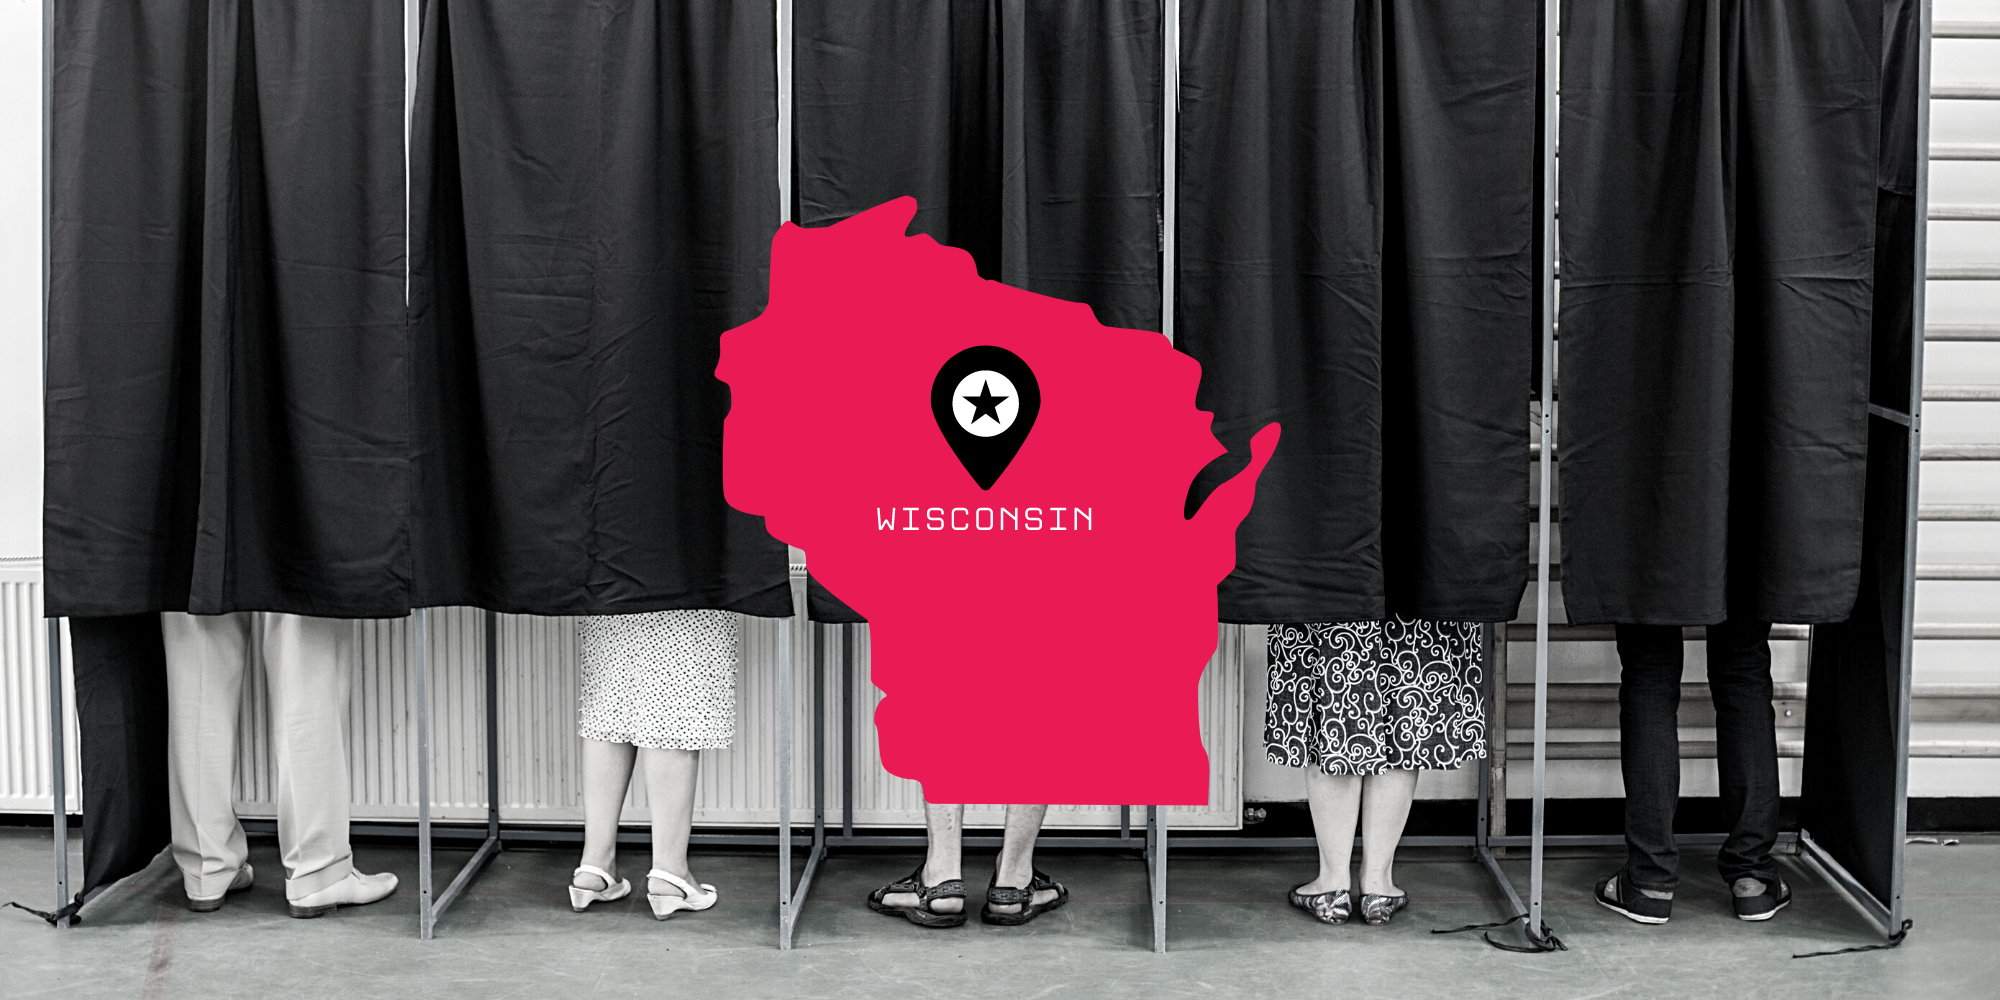 Why’s it so hard to vote in Wisconsin?